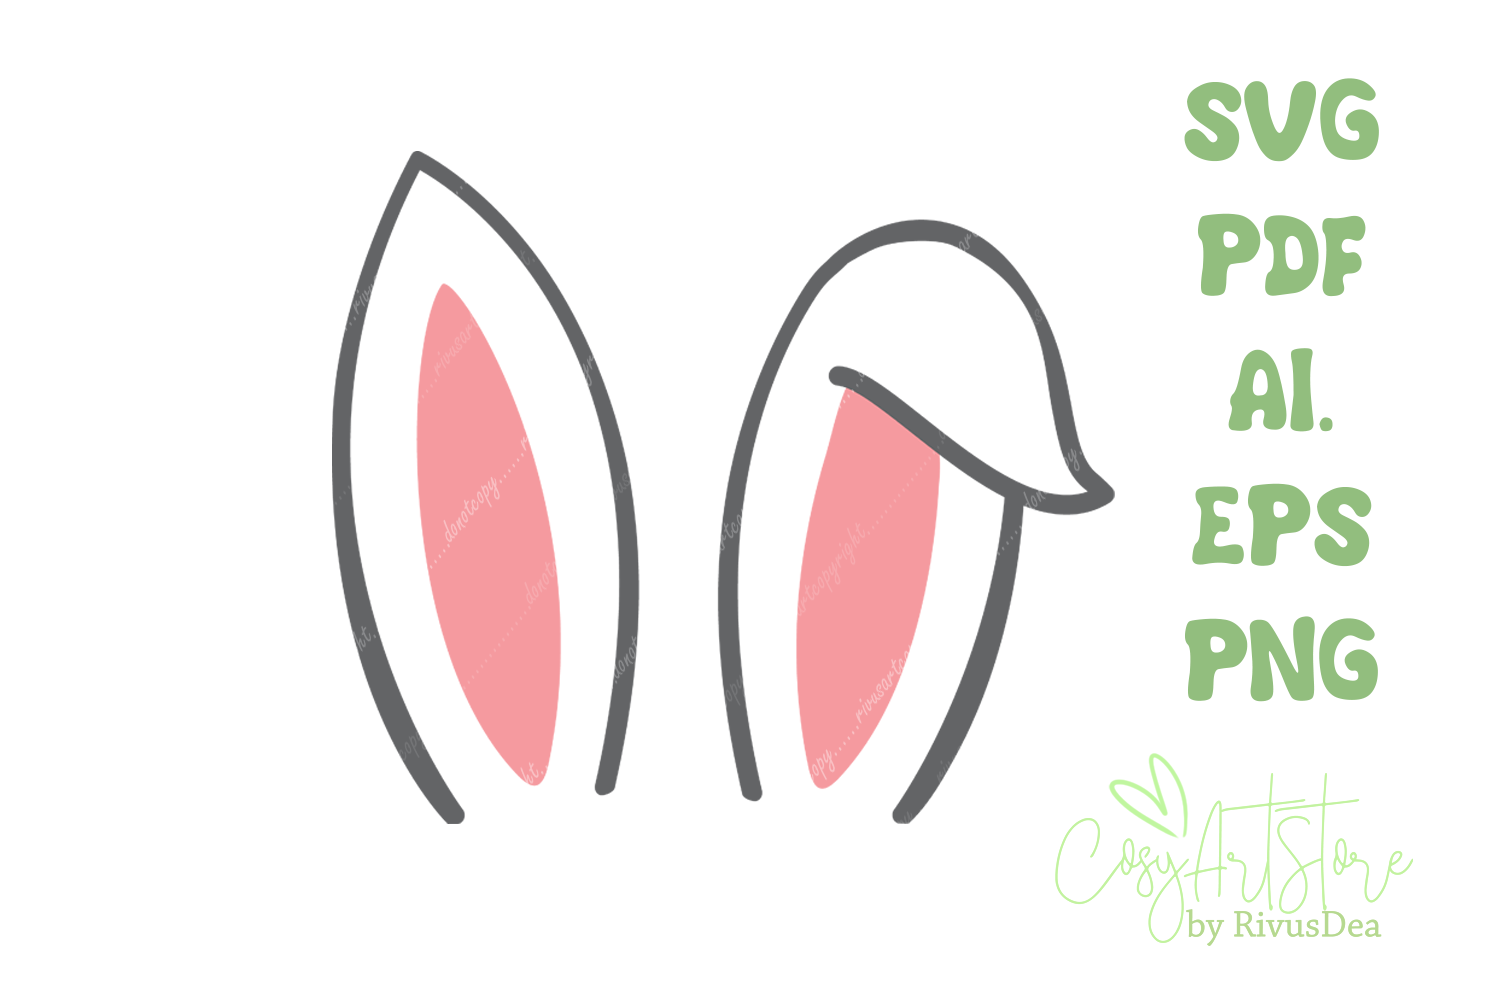 Bunny ears SVG download. Bunny ears PNG clipart. By Rivus Art